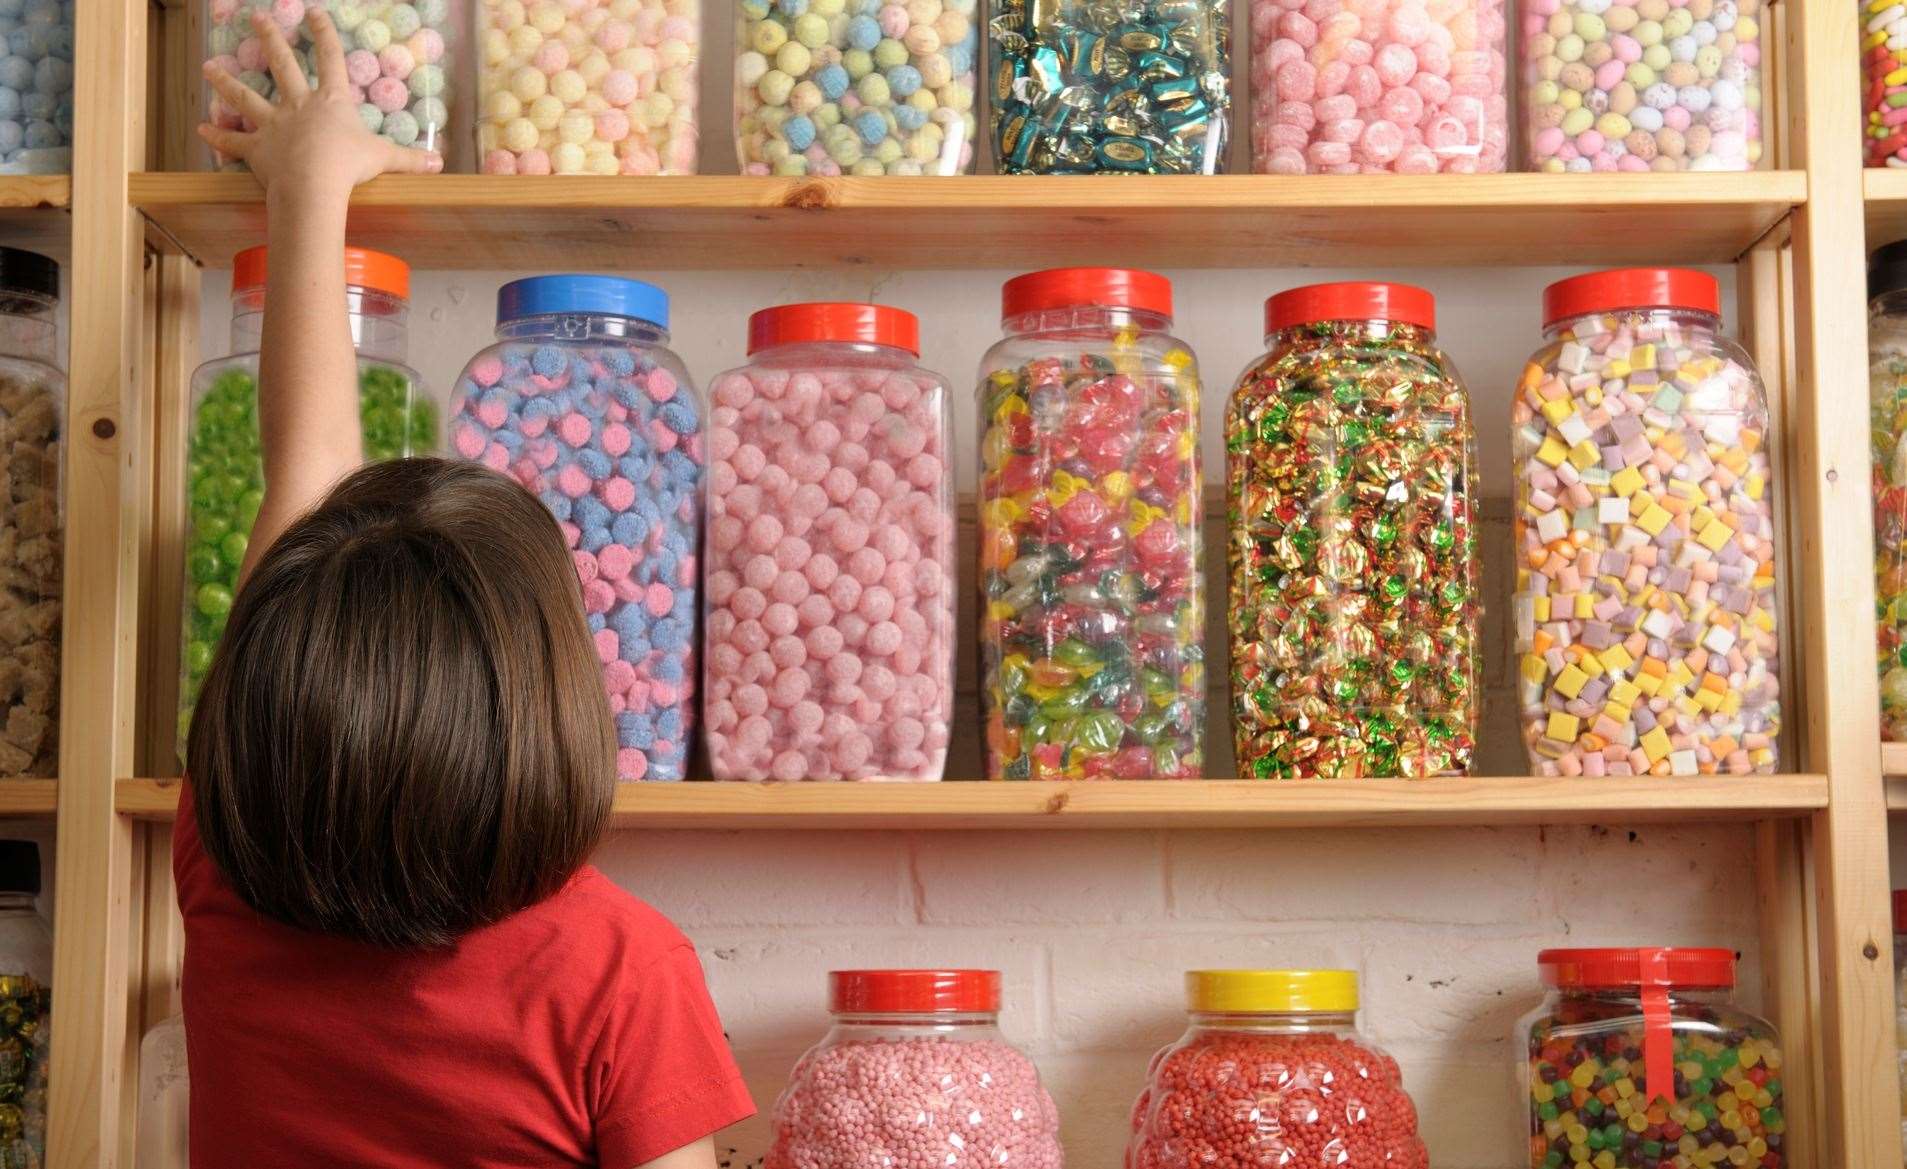 Pick and mix gave shoppers the chance to mix their sweets for the first time. Image: iStock.